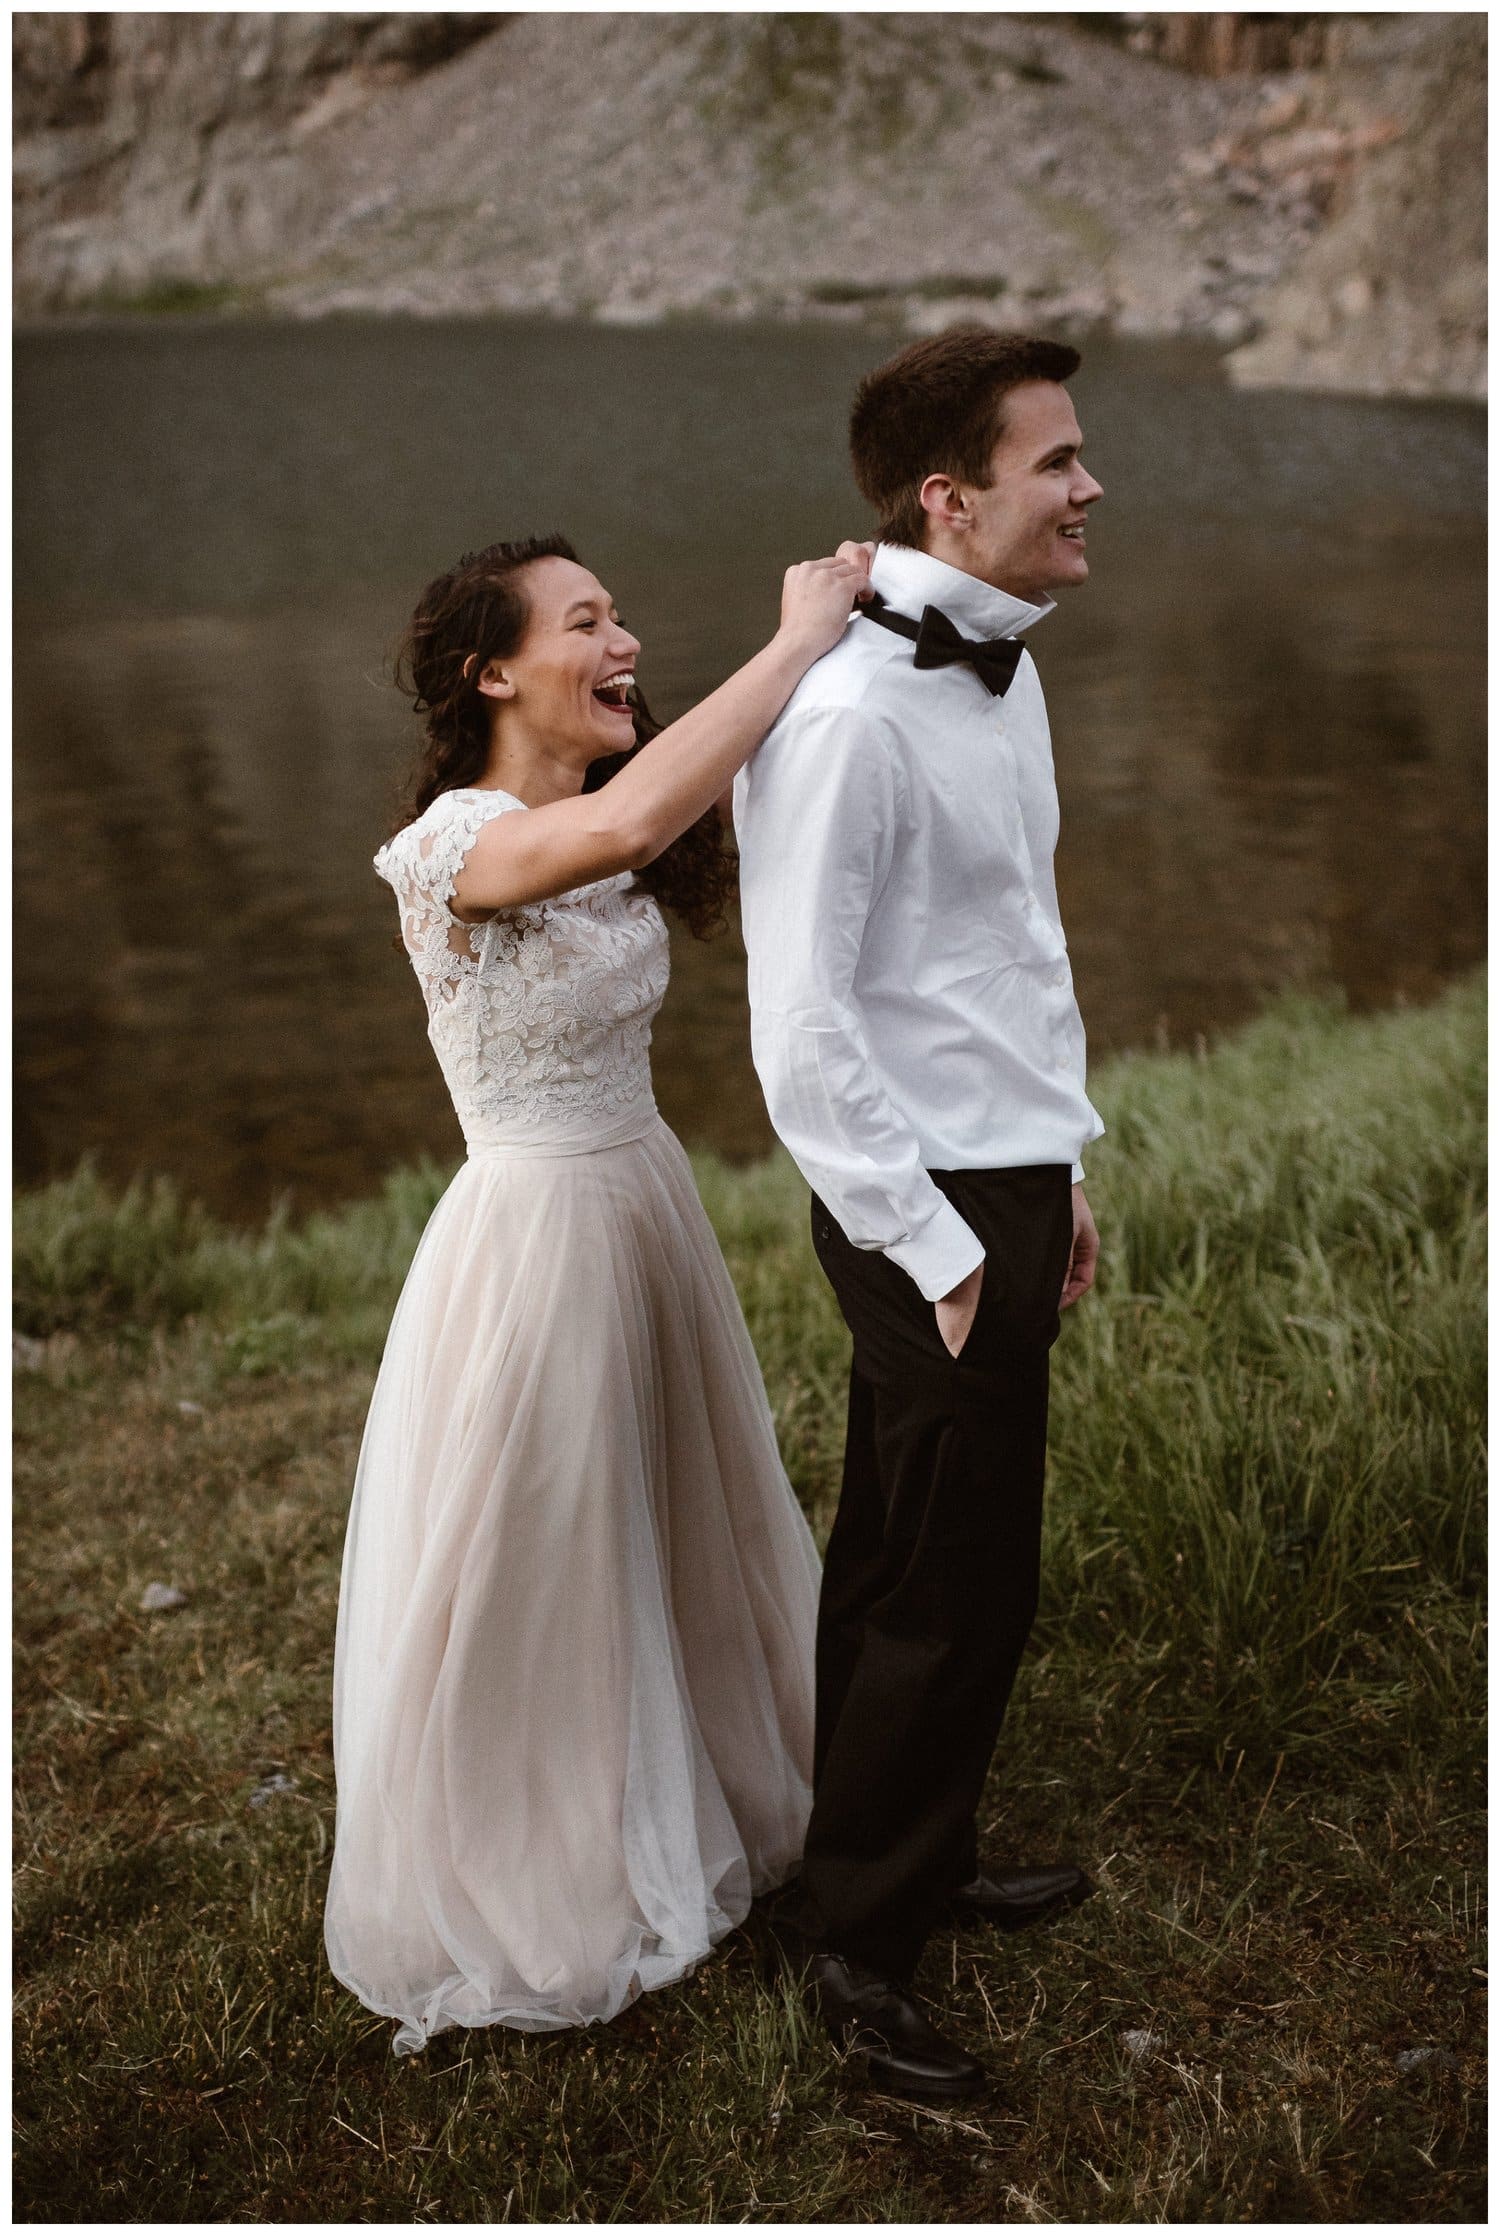 Bride helps groom put on his bowtie on their elopement day. They are both smiling, wearing wedding attire, and standing in front of a lake.